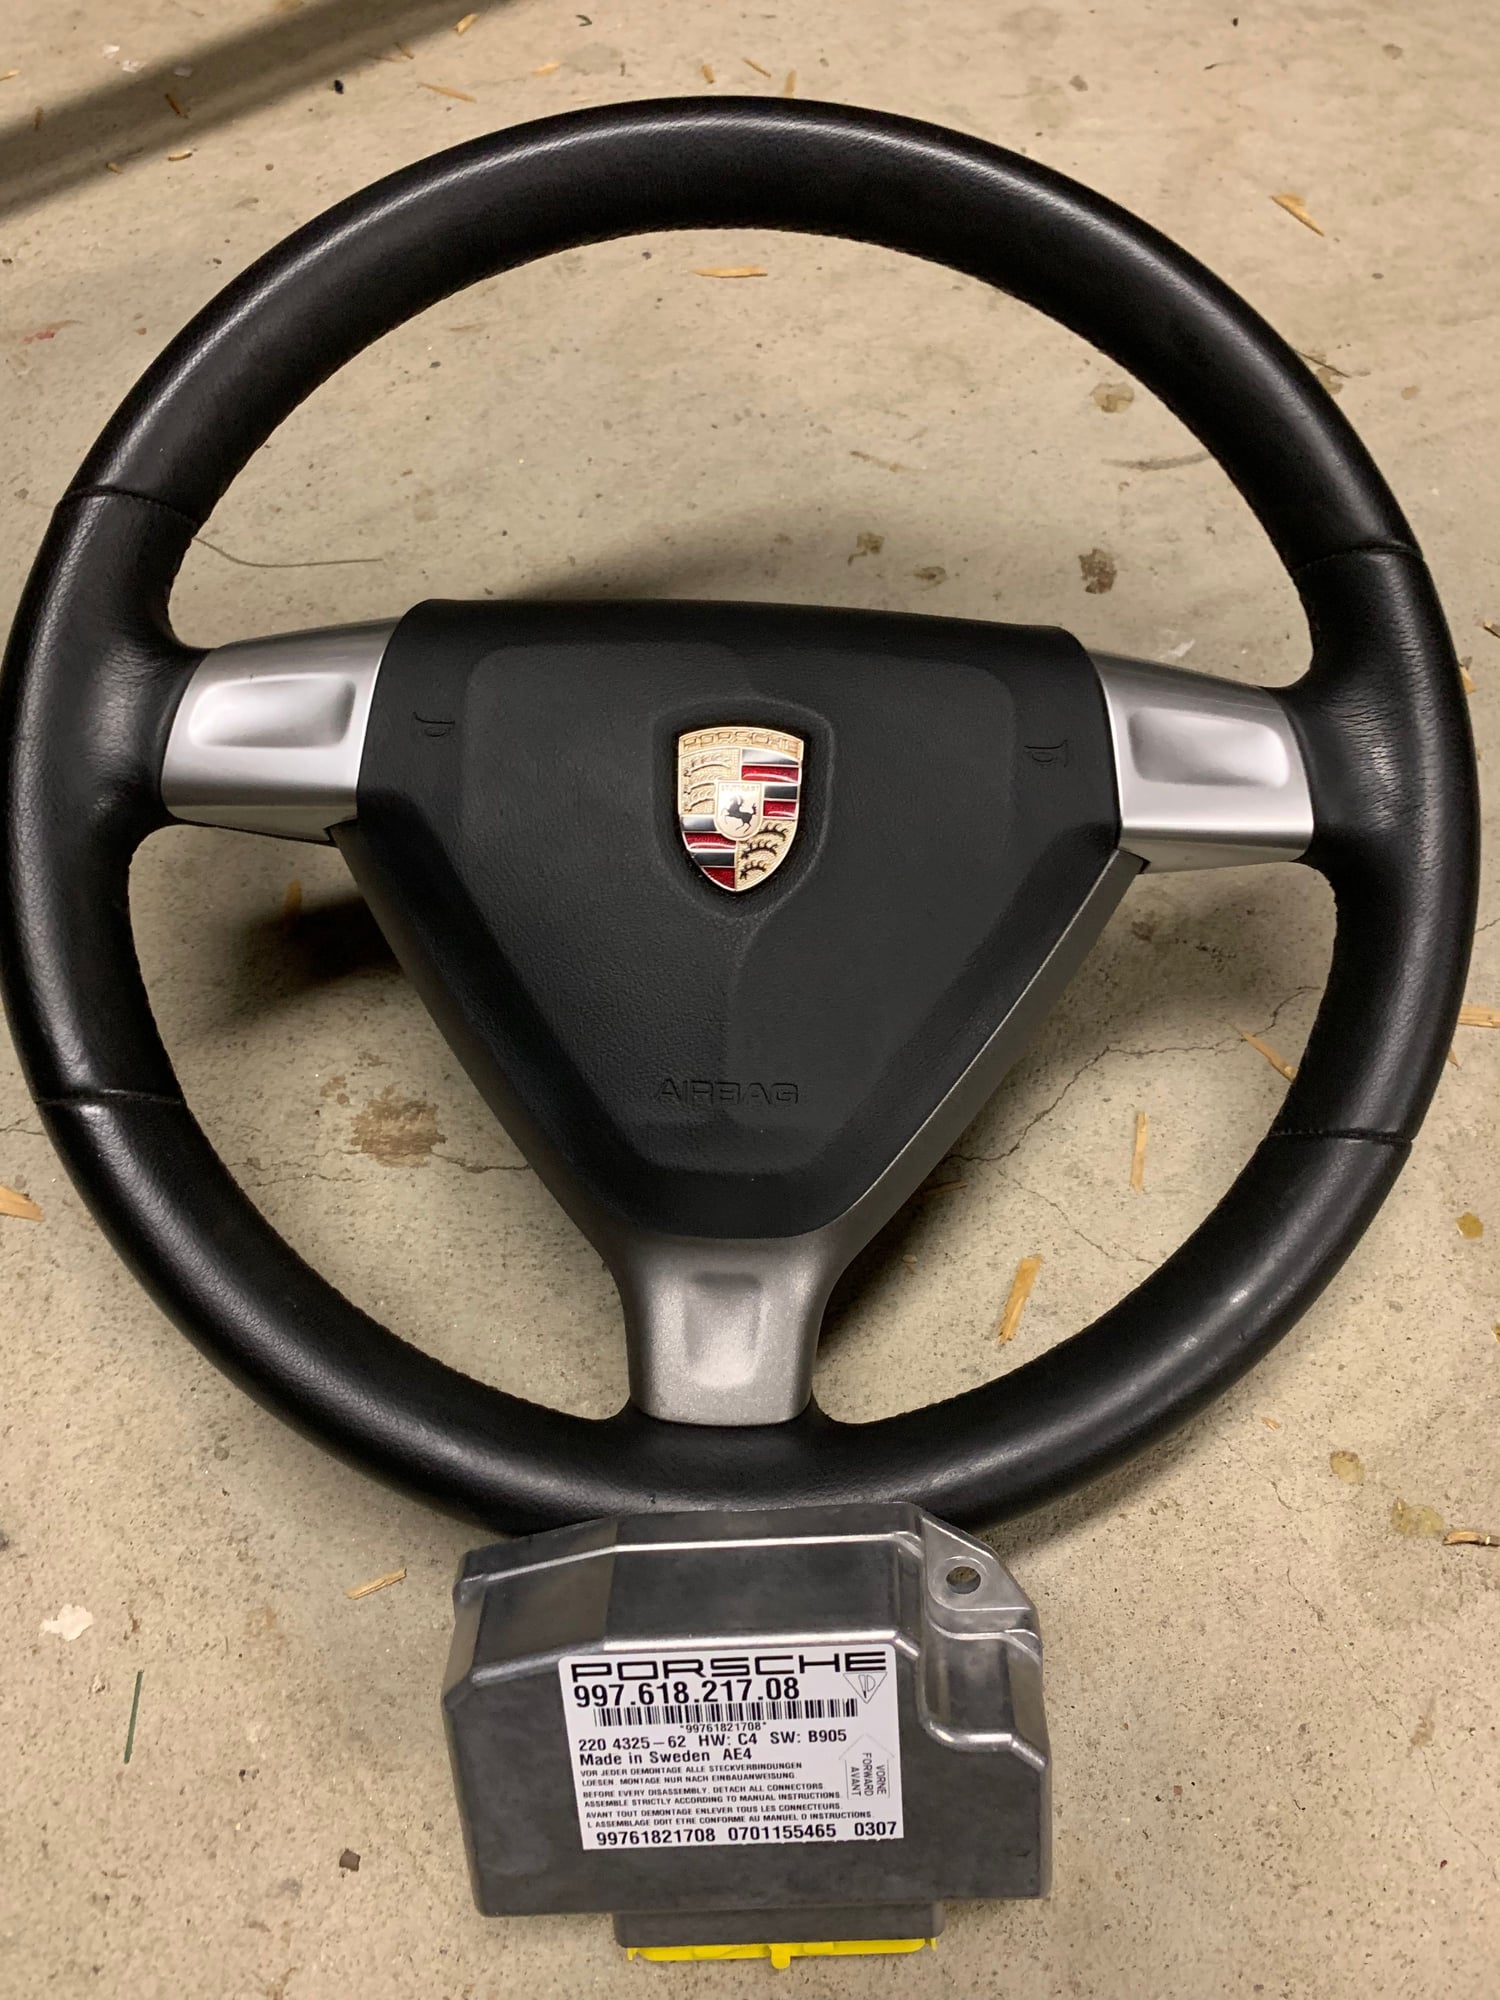 2000 Porsche 911 - Steering wheel with airbag and airbag module - Interior/Upholstery - $300 - Wilmington, DE 19711, United States